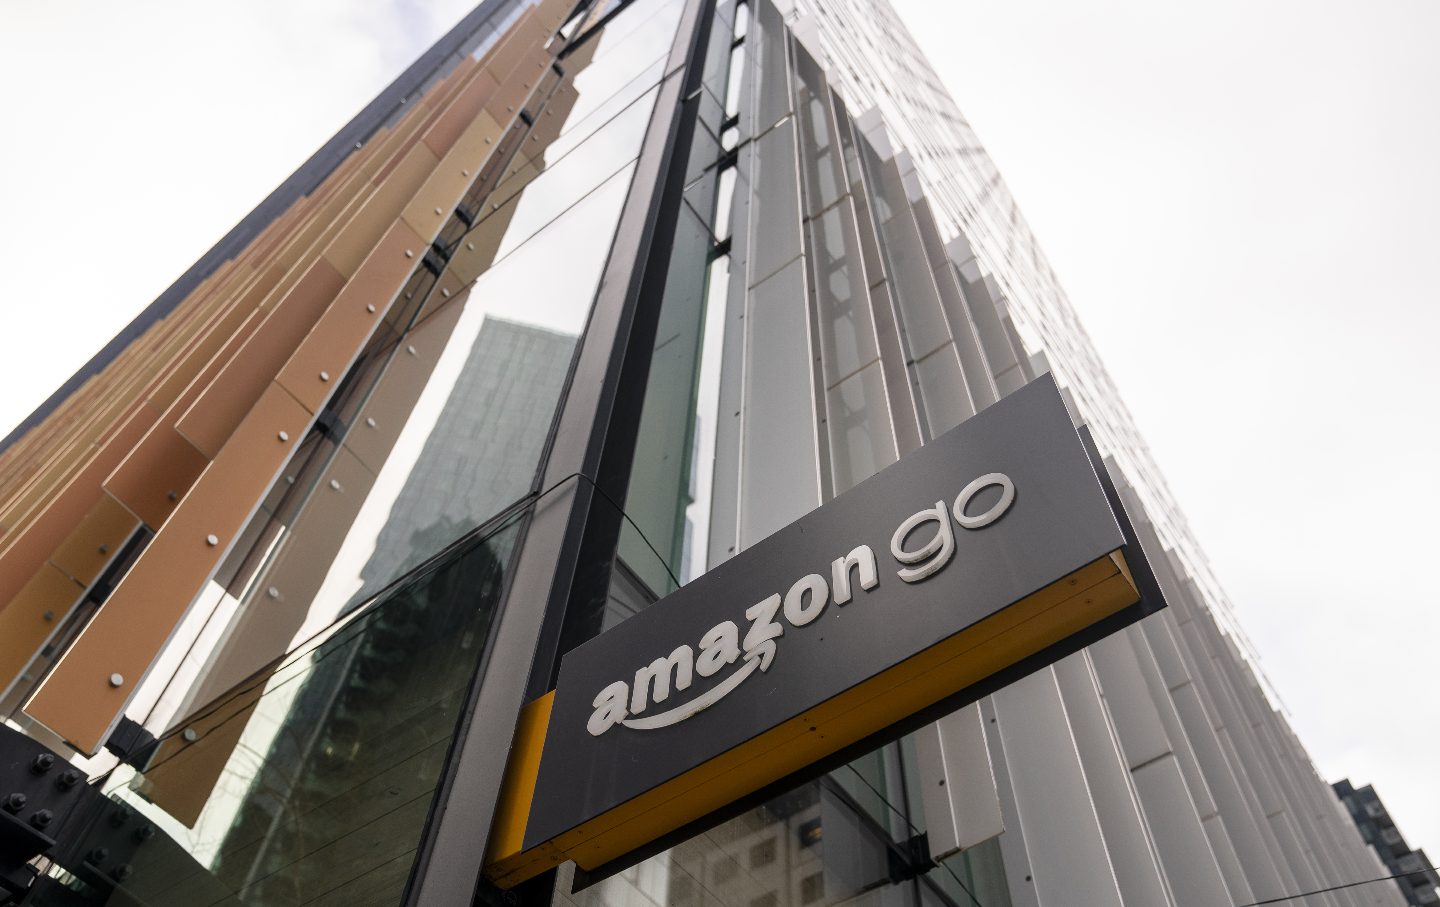 Signage outside an Amazon Go store at the company headquarters campus in the South Lake Union neighborhood of Seattle, Washington, U.S.